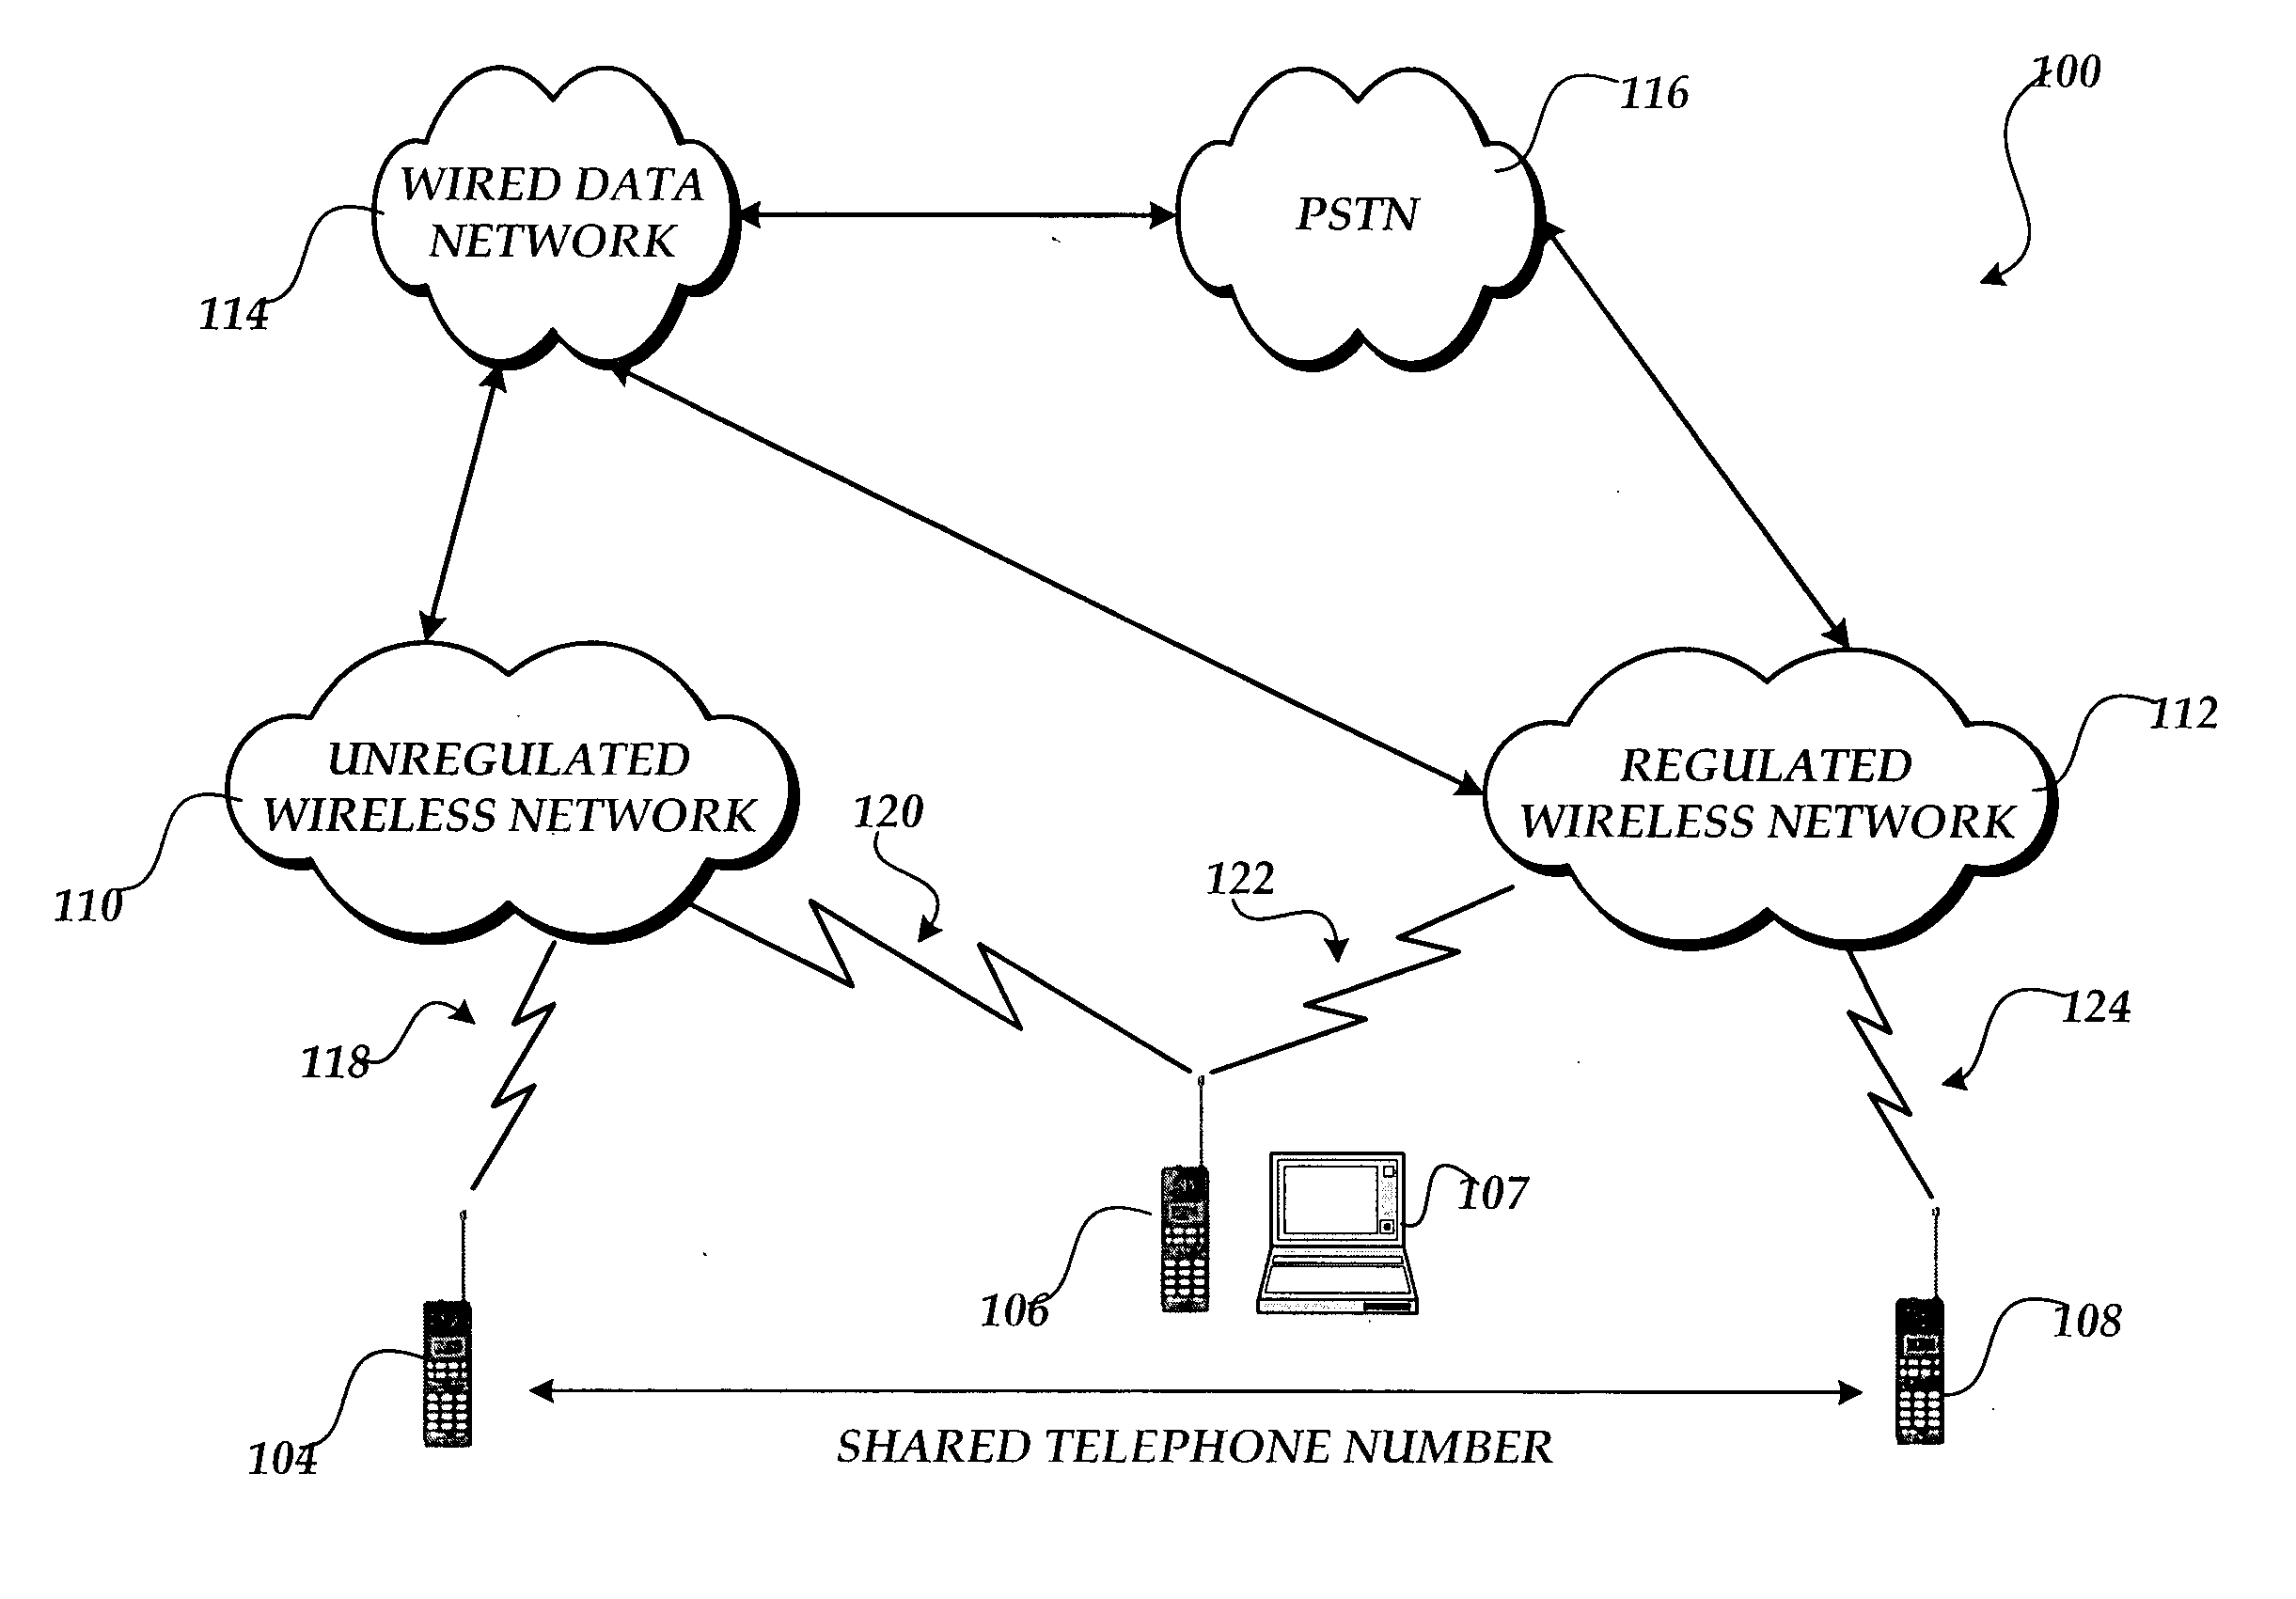 System and method for providing integrated voice and data services utilizing wired cordless access with unlicensed spectrum and wired access with licensed spectrum